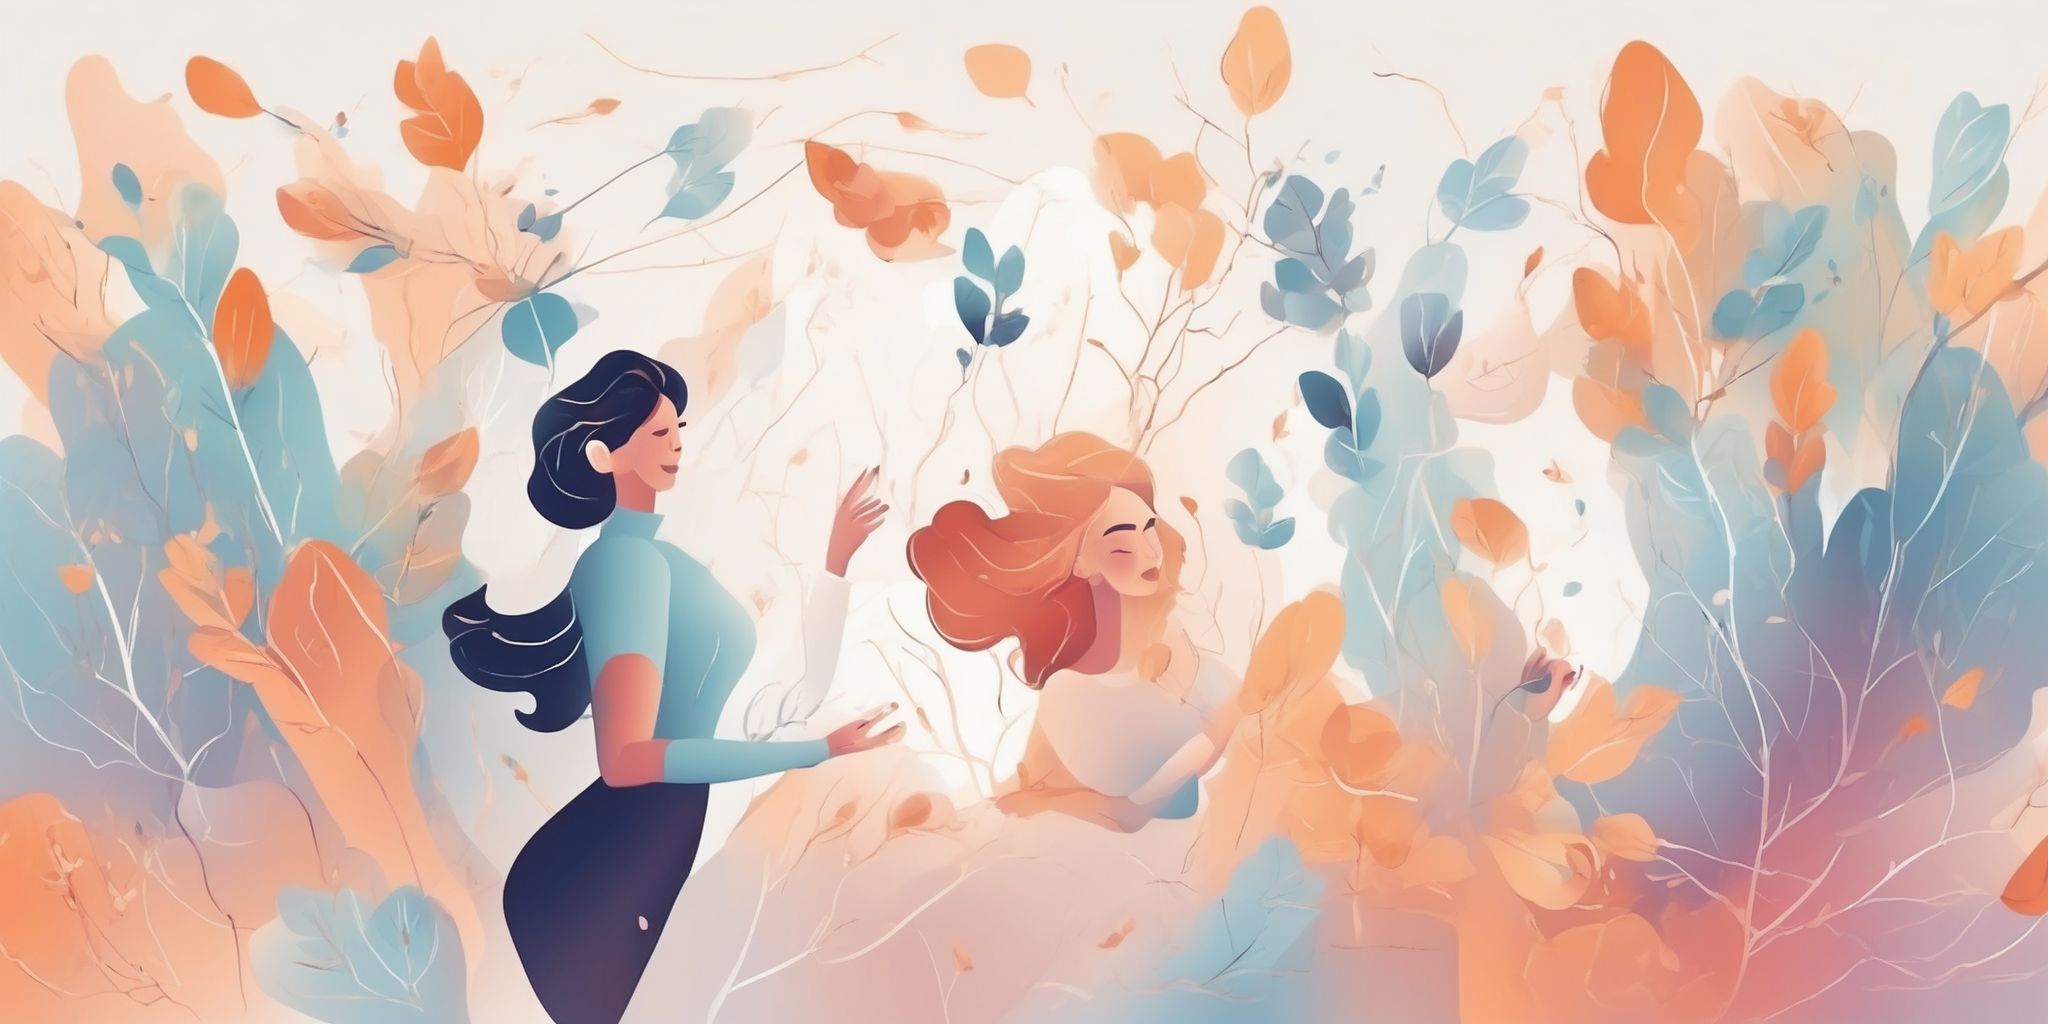 Engagement rate in illustration style with gradients and white background